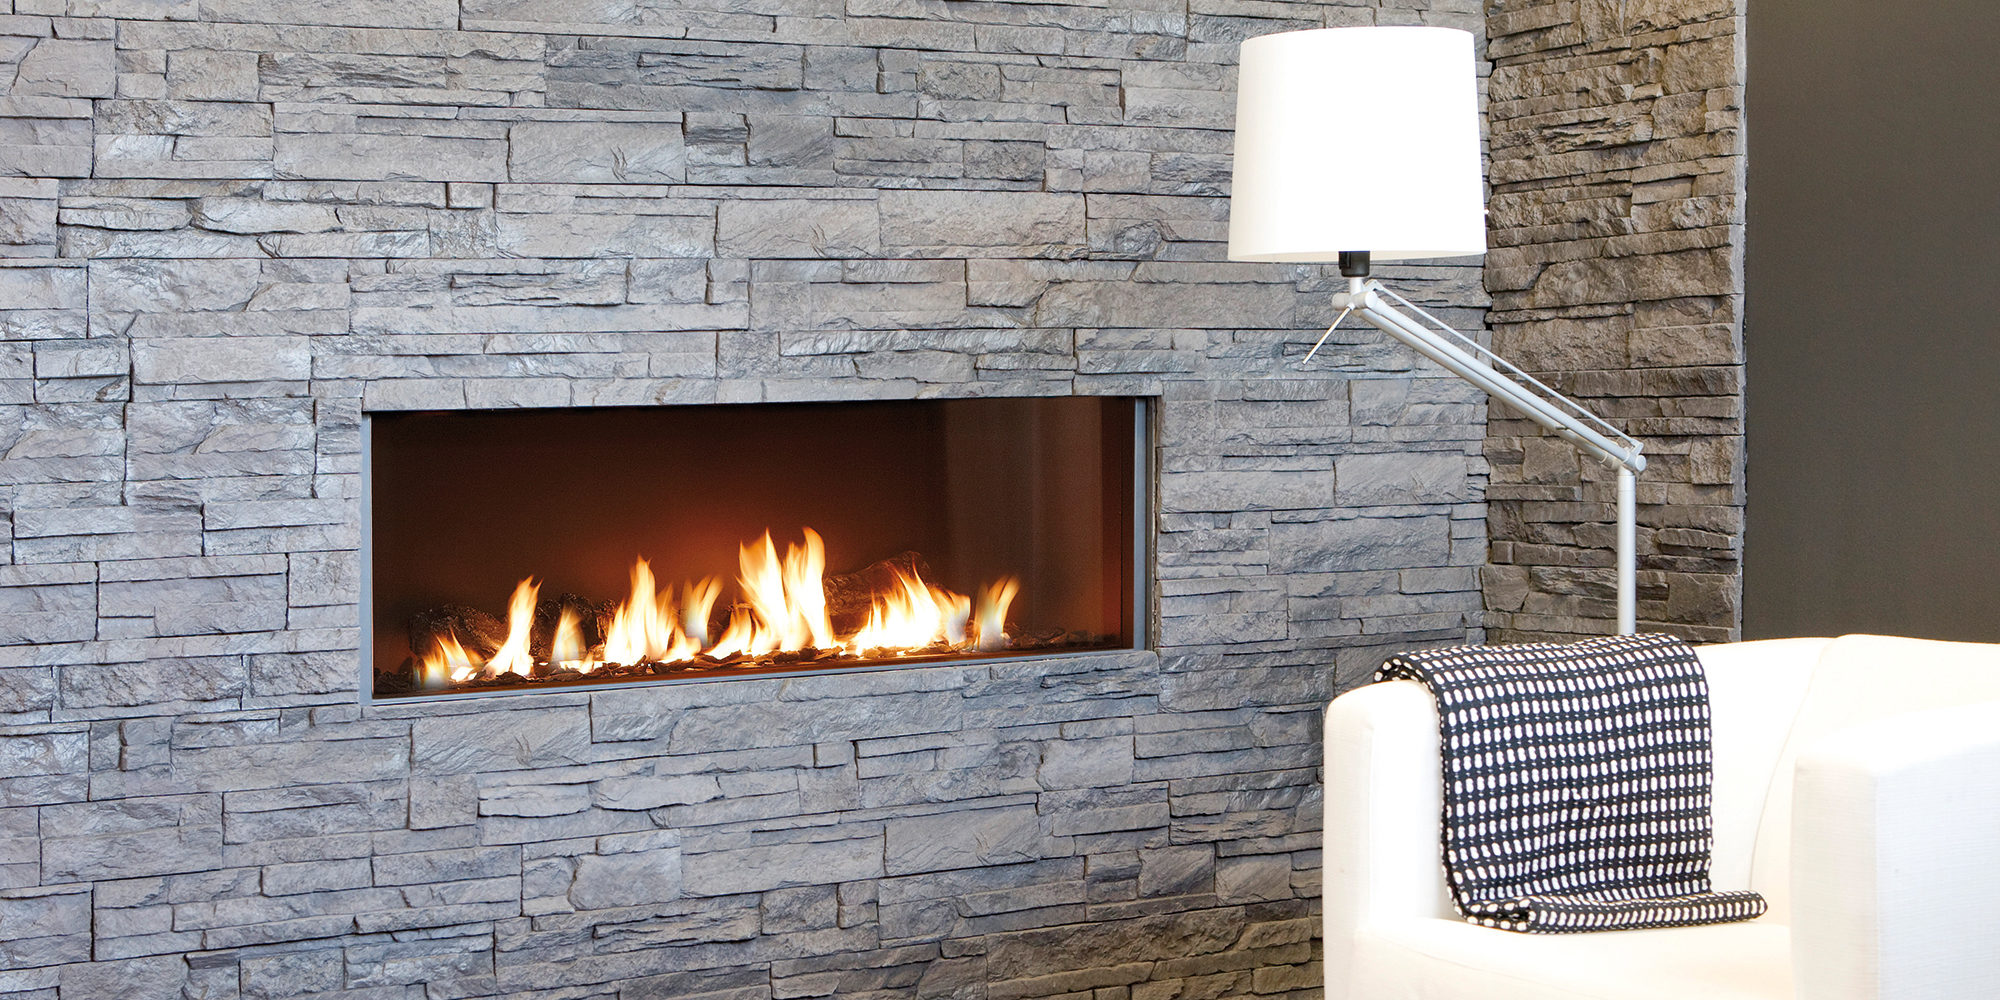 Perfectly proportioned linear modern fireplace